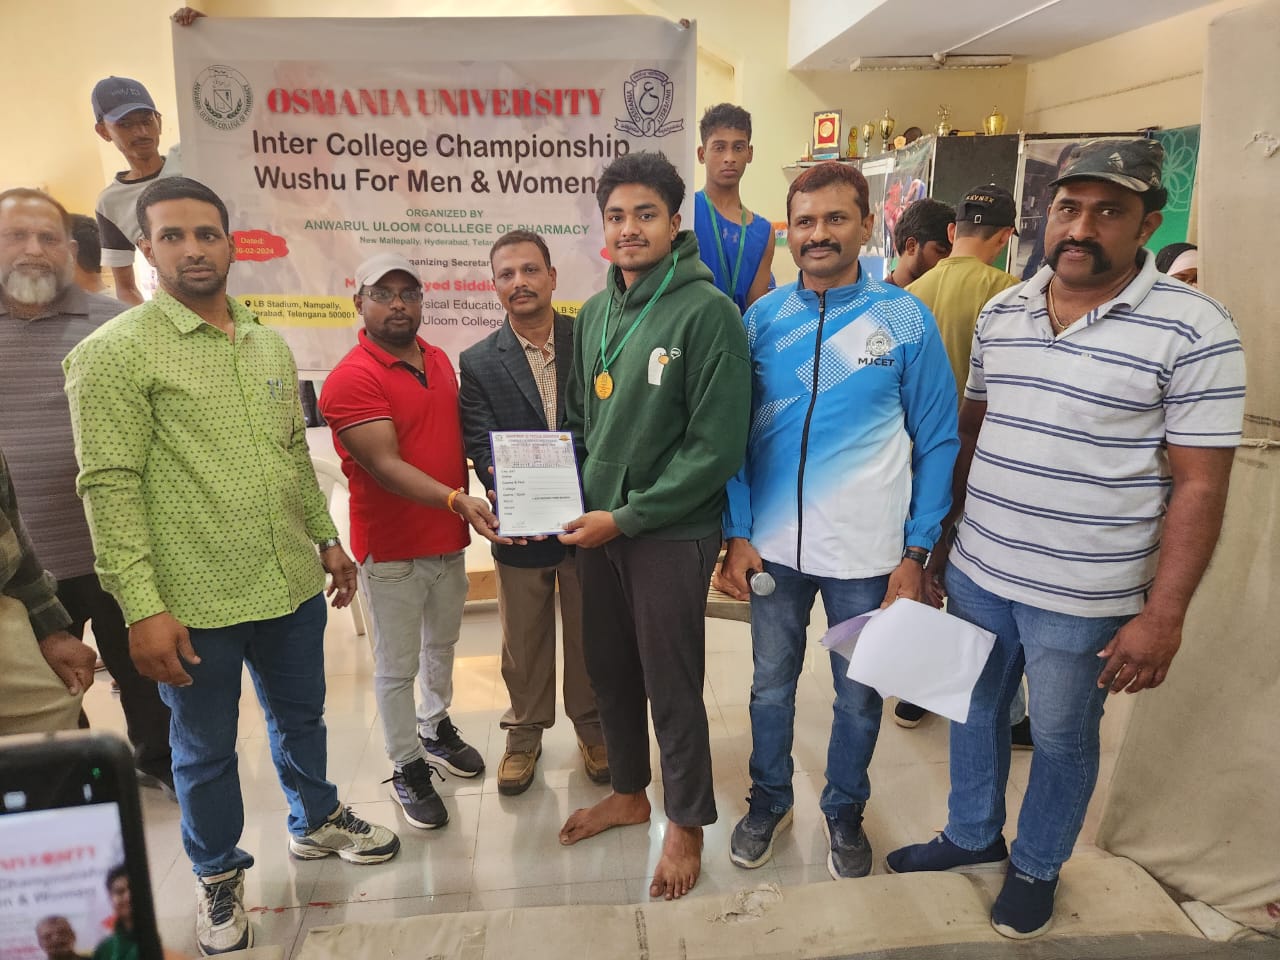 Osmania University Inter College Wushu Championship (Men)
Held at LB stadium on 06-02-2024.
MJCET students performed very good and won 2 Gold medals.
Saud Al Amoodi IT-3 won Gold 🥇 in -52 
Mohammad Abdullah Civil -1 won Gold 🥇 in -90